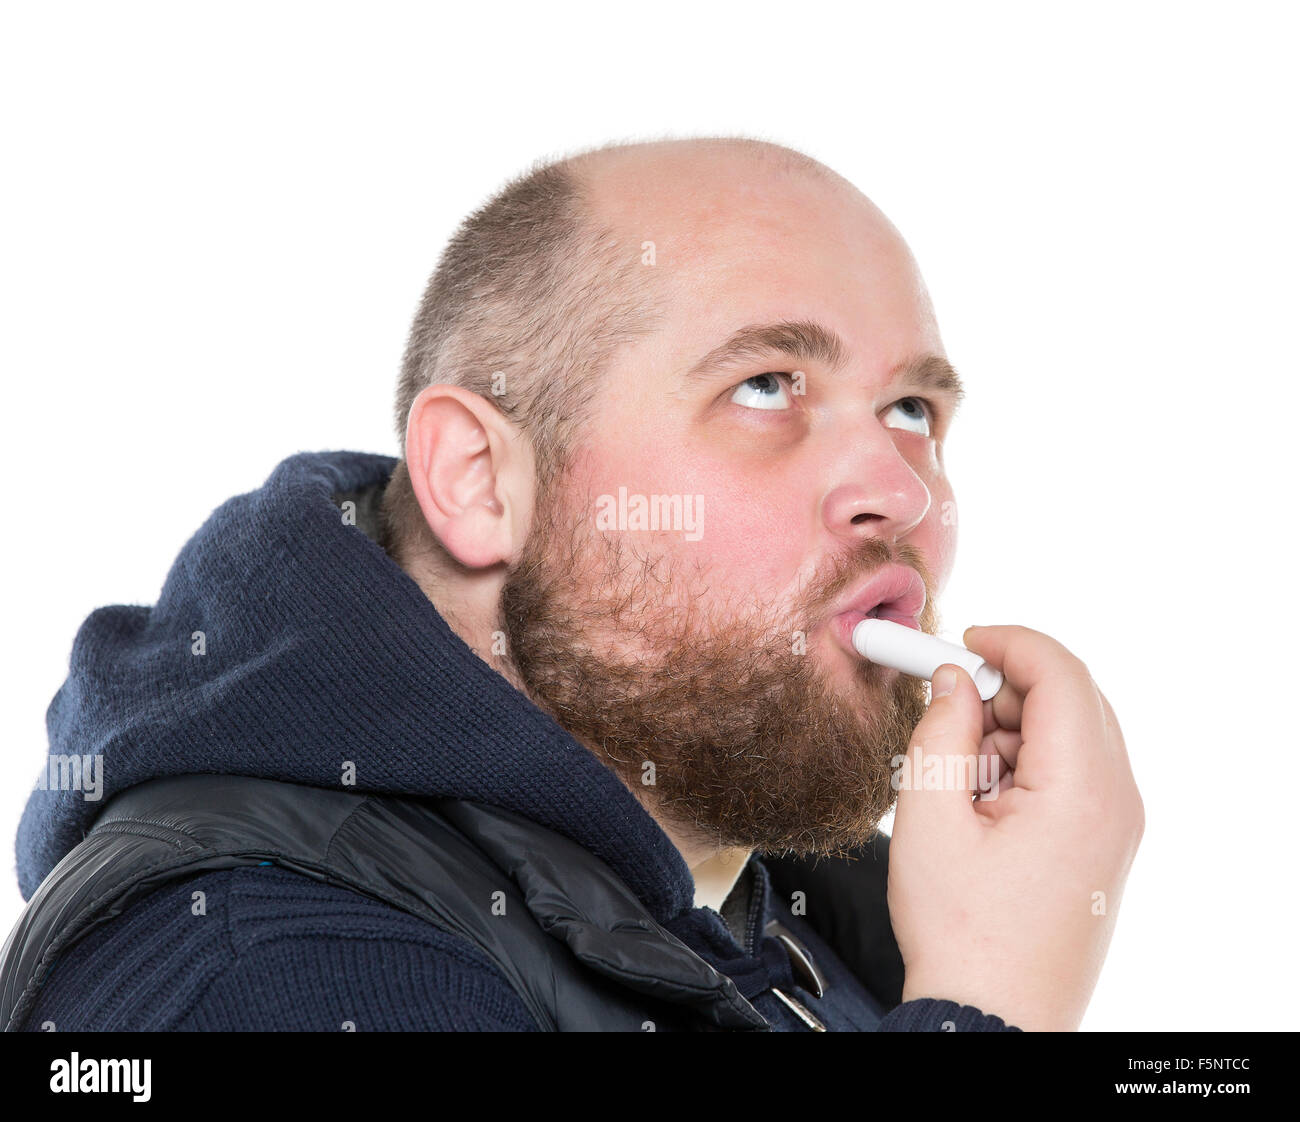 Bald Bearded Fat Man Uses a Protective Lipstick, on white background Stock Photo